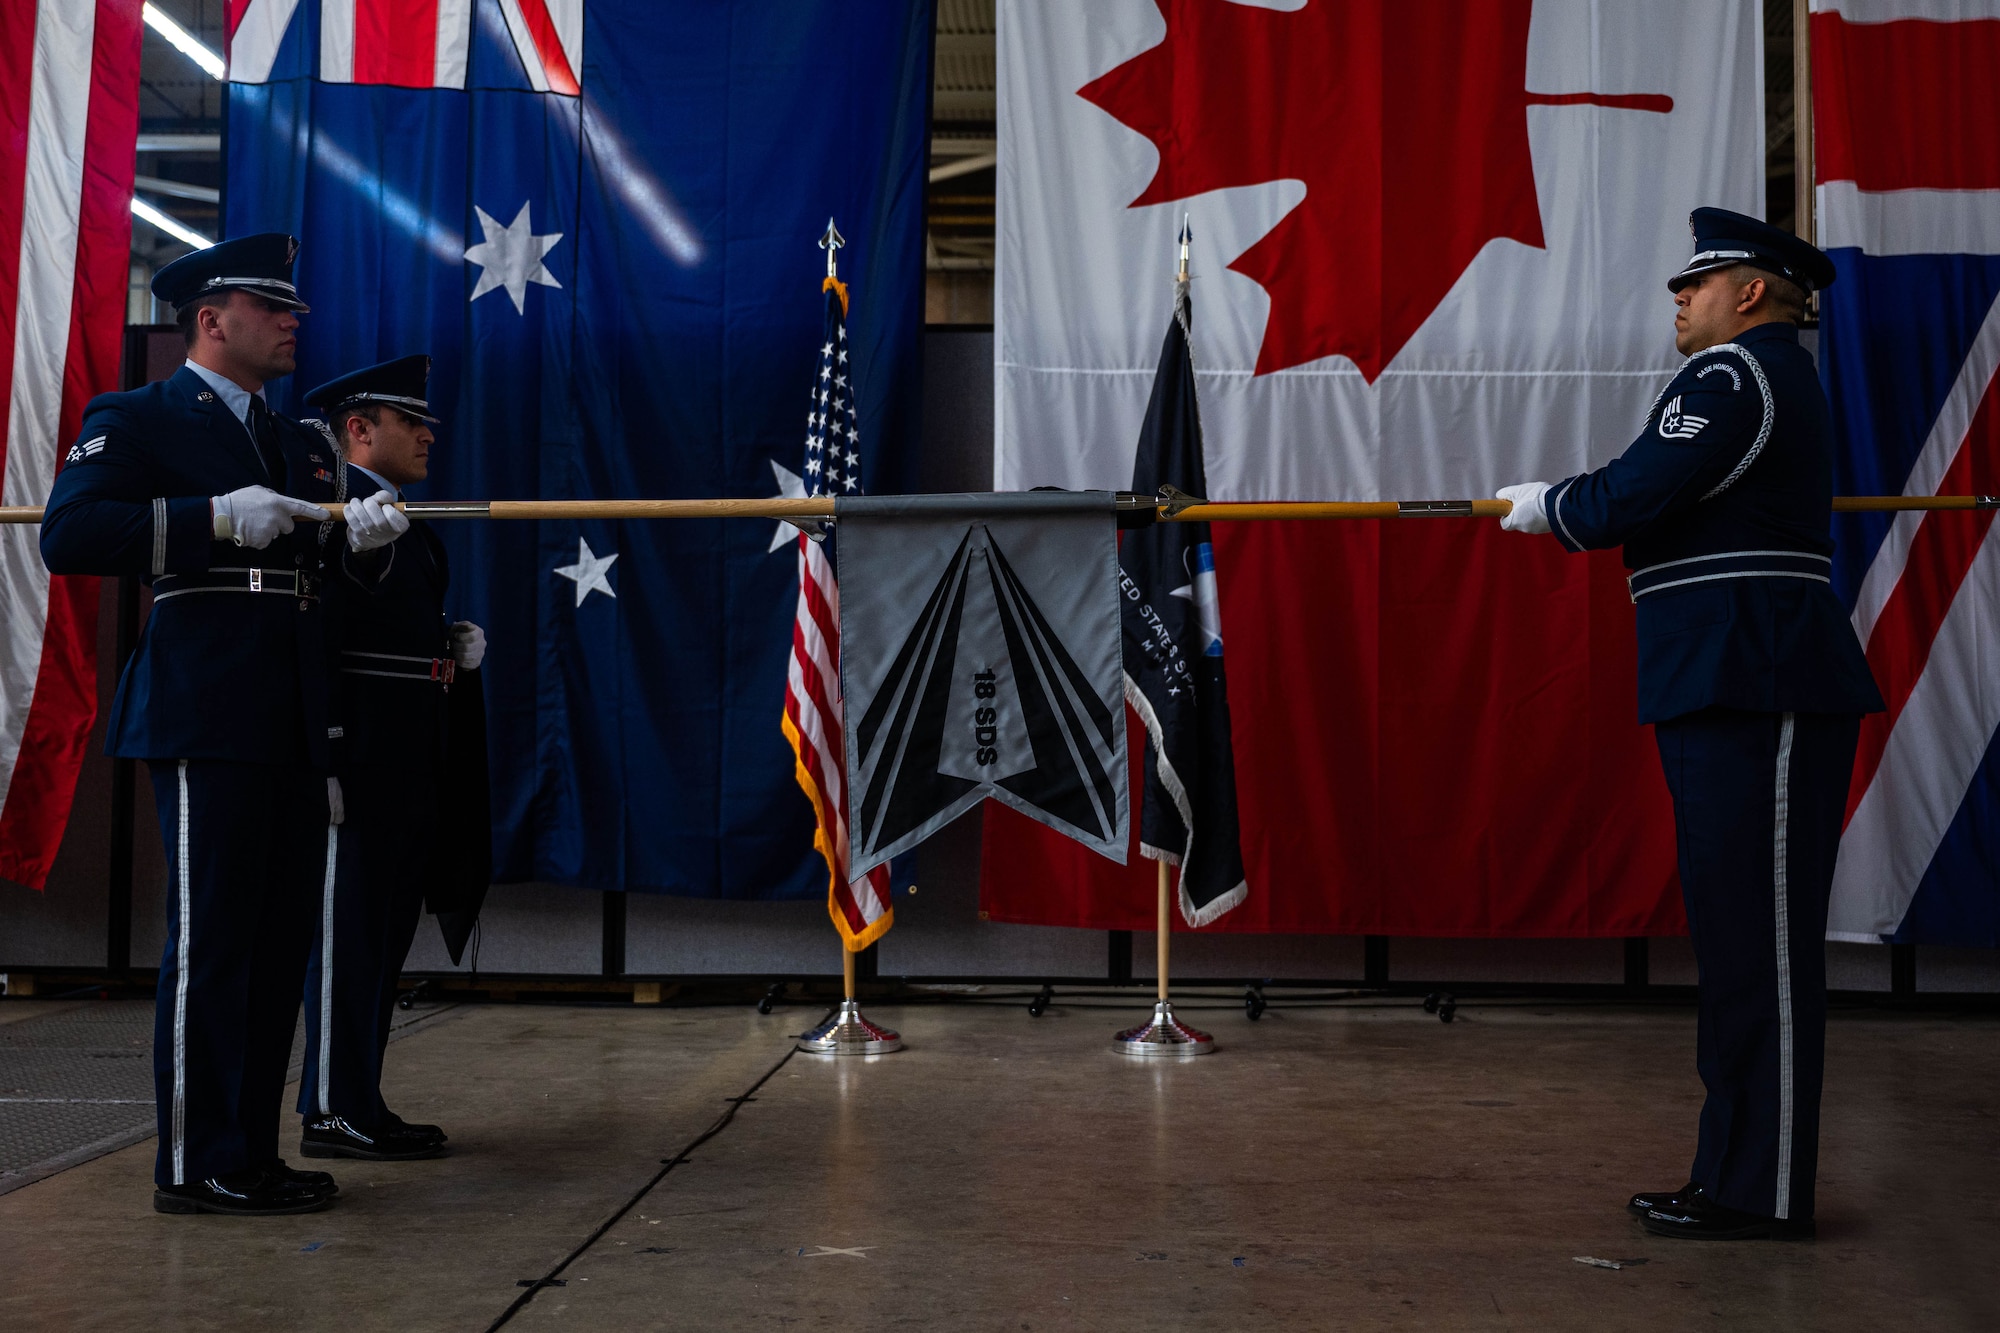 Members of the Vandenberg Space Force Base Honor Guard team unfurl the new 18th Space Defense Squadron’s flag during a re-designation ceremony at Vandenberg SFB, Calif., April 13, 2022. The 18th Space Control Squadron was re-designated as the 18 SDS to signify increased focus on Space Domain Awareness (SDA) command and control, integrating and synchronizing SDA capabilities in support of the contested and congested domain, and collaboration with allies and partners. The furling and unfurling of flags have been a long standing tradition in ceremonies to symbolize the activation, deactivation or re-designation of units. (U.S. Space Force photo by Tech. Sgt. Luke Kitterman)